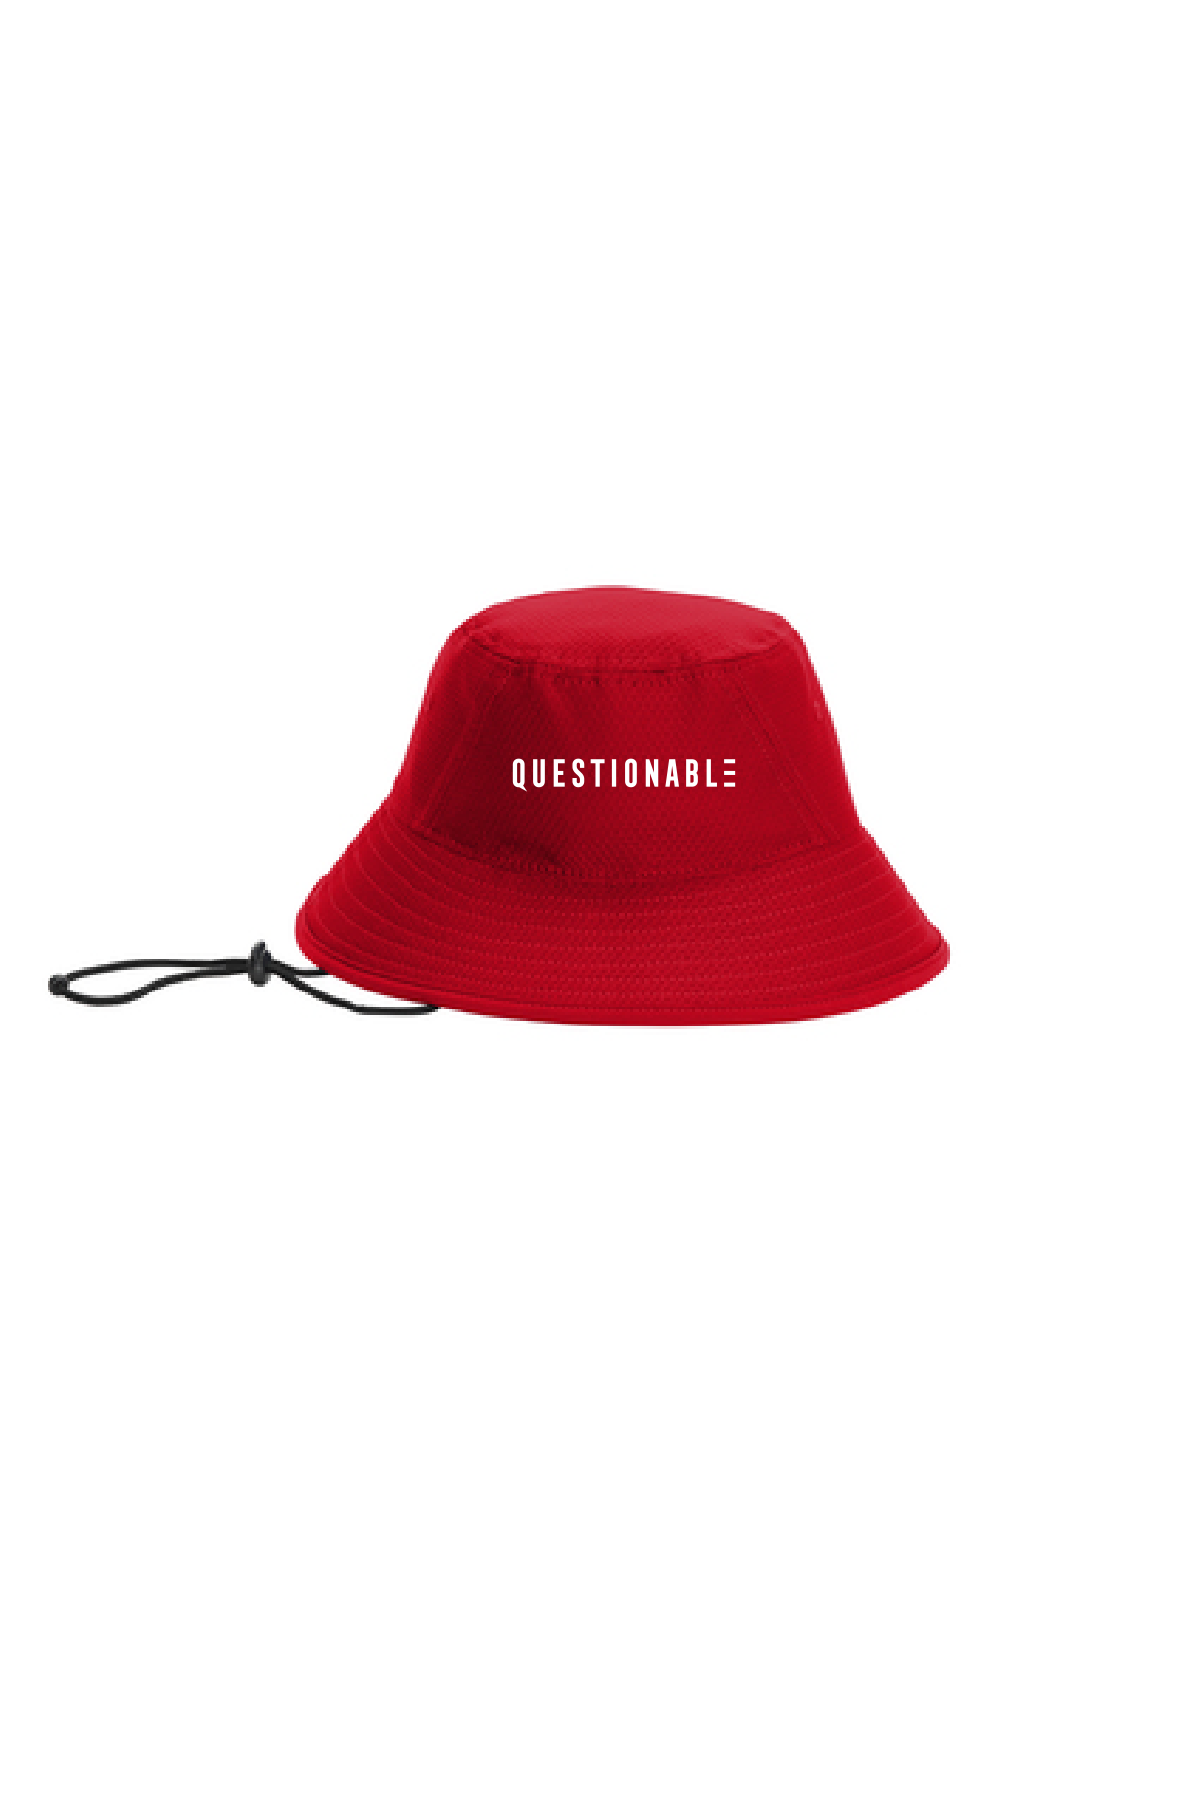 Questionable - Embroidered New Era Bucket Hat